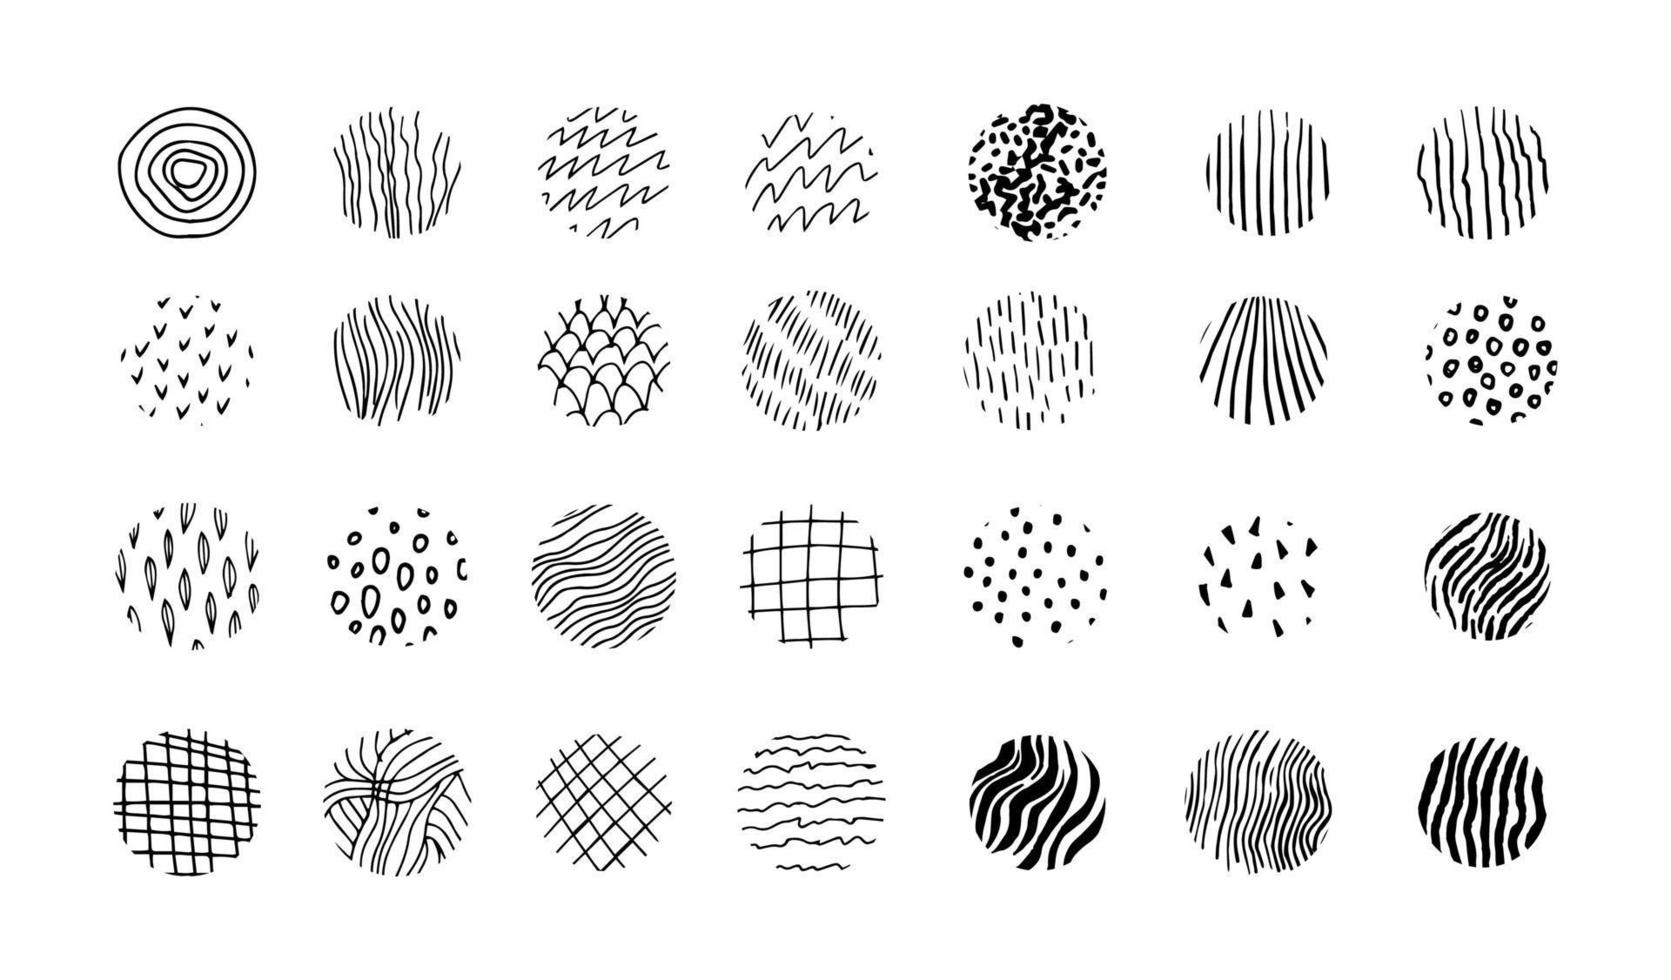 Organic vector abstract textures, waves, dots, lines, forms.